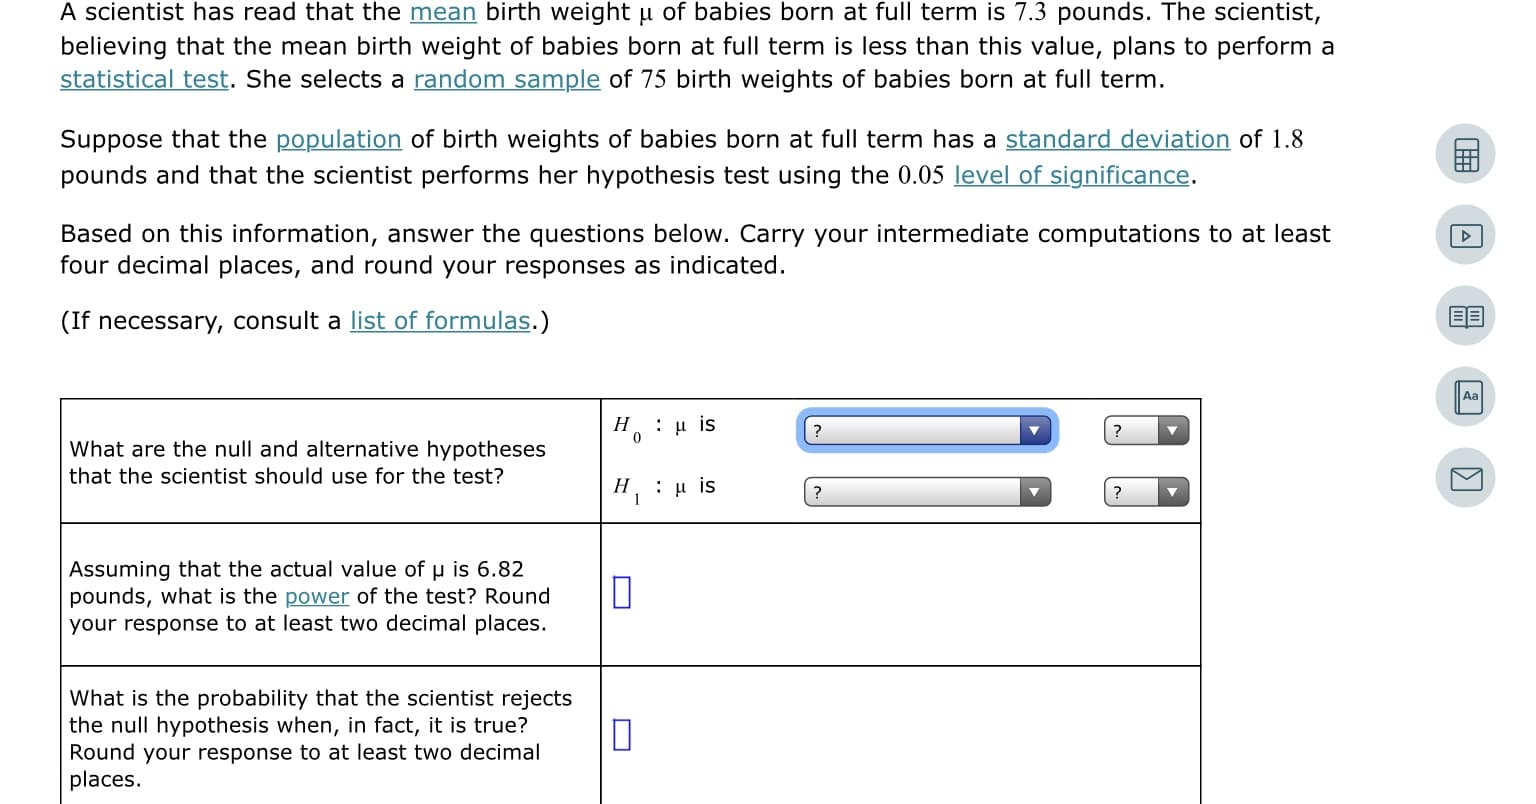 A scientist has read that the mean birth weight u of babies born at full term is 7.3 pounds. The scientist,
believing that the mean birth weight of babies born at full term is less than this value, plans to perform a
statistical test. She selects a random sample of 75 birth weights of babies born at full term.
Suppose that the population of birth weights of babies born at full term has a standard deviation of 1.8
pounds and that the scientist performs her hypothesis test using the 0.05 level of significance.
Based on this information, answer the questions below. Carry your intermediate computations to at least
four decimal places, and round your responses as indicated.
(If necessary, consult a list of formulas.)
Н
: μ is
What are the null and alternative hypotheses
that the scientist should use for the test?
H, : u is
Assuming that the actual value of u is 6.82
pounds, what is the power of the test? Round
your response to at least two decimal places.
What is the probability that the scientist rejects
the null hypothesis when, in fact, it is true?
Round your response to at least two decimal
places.
